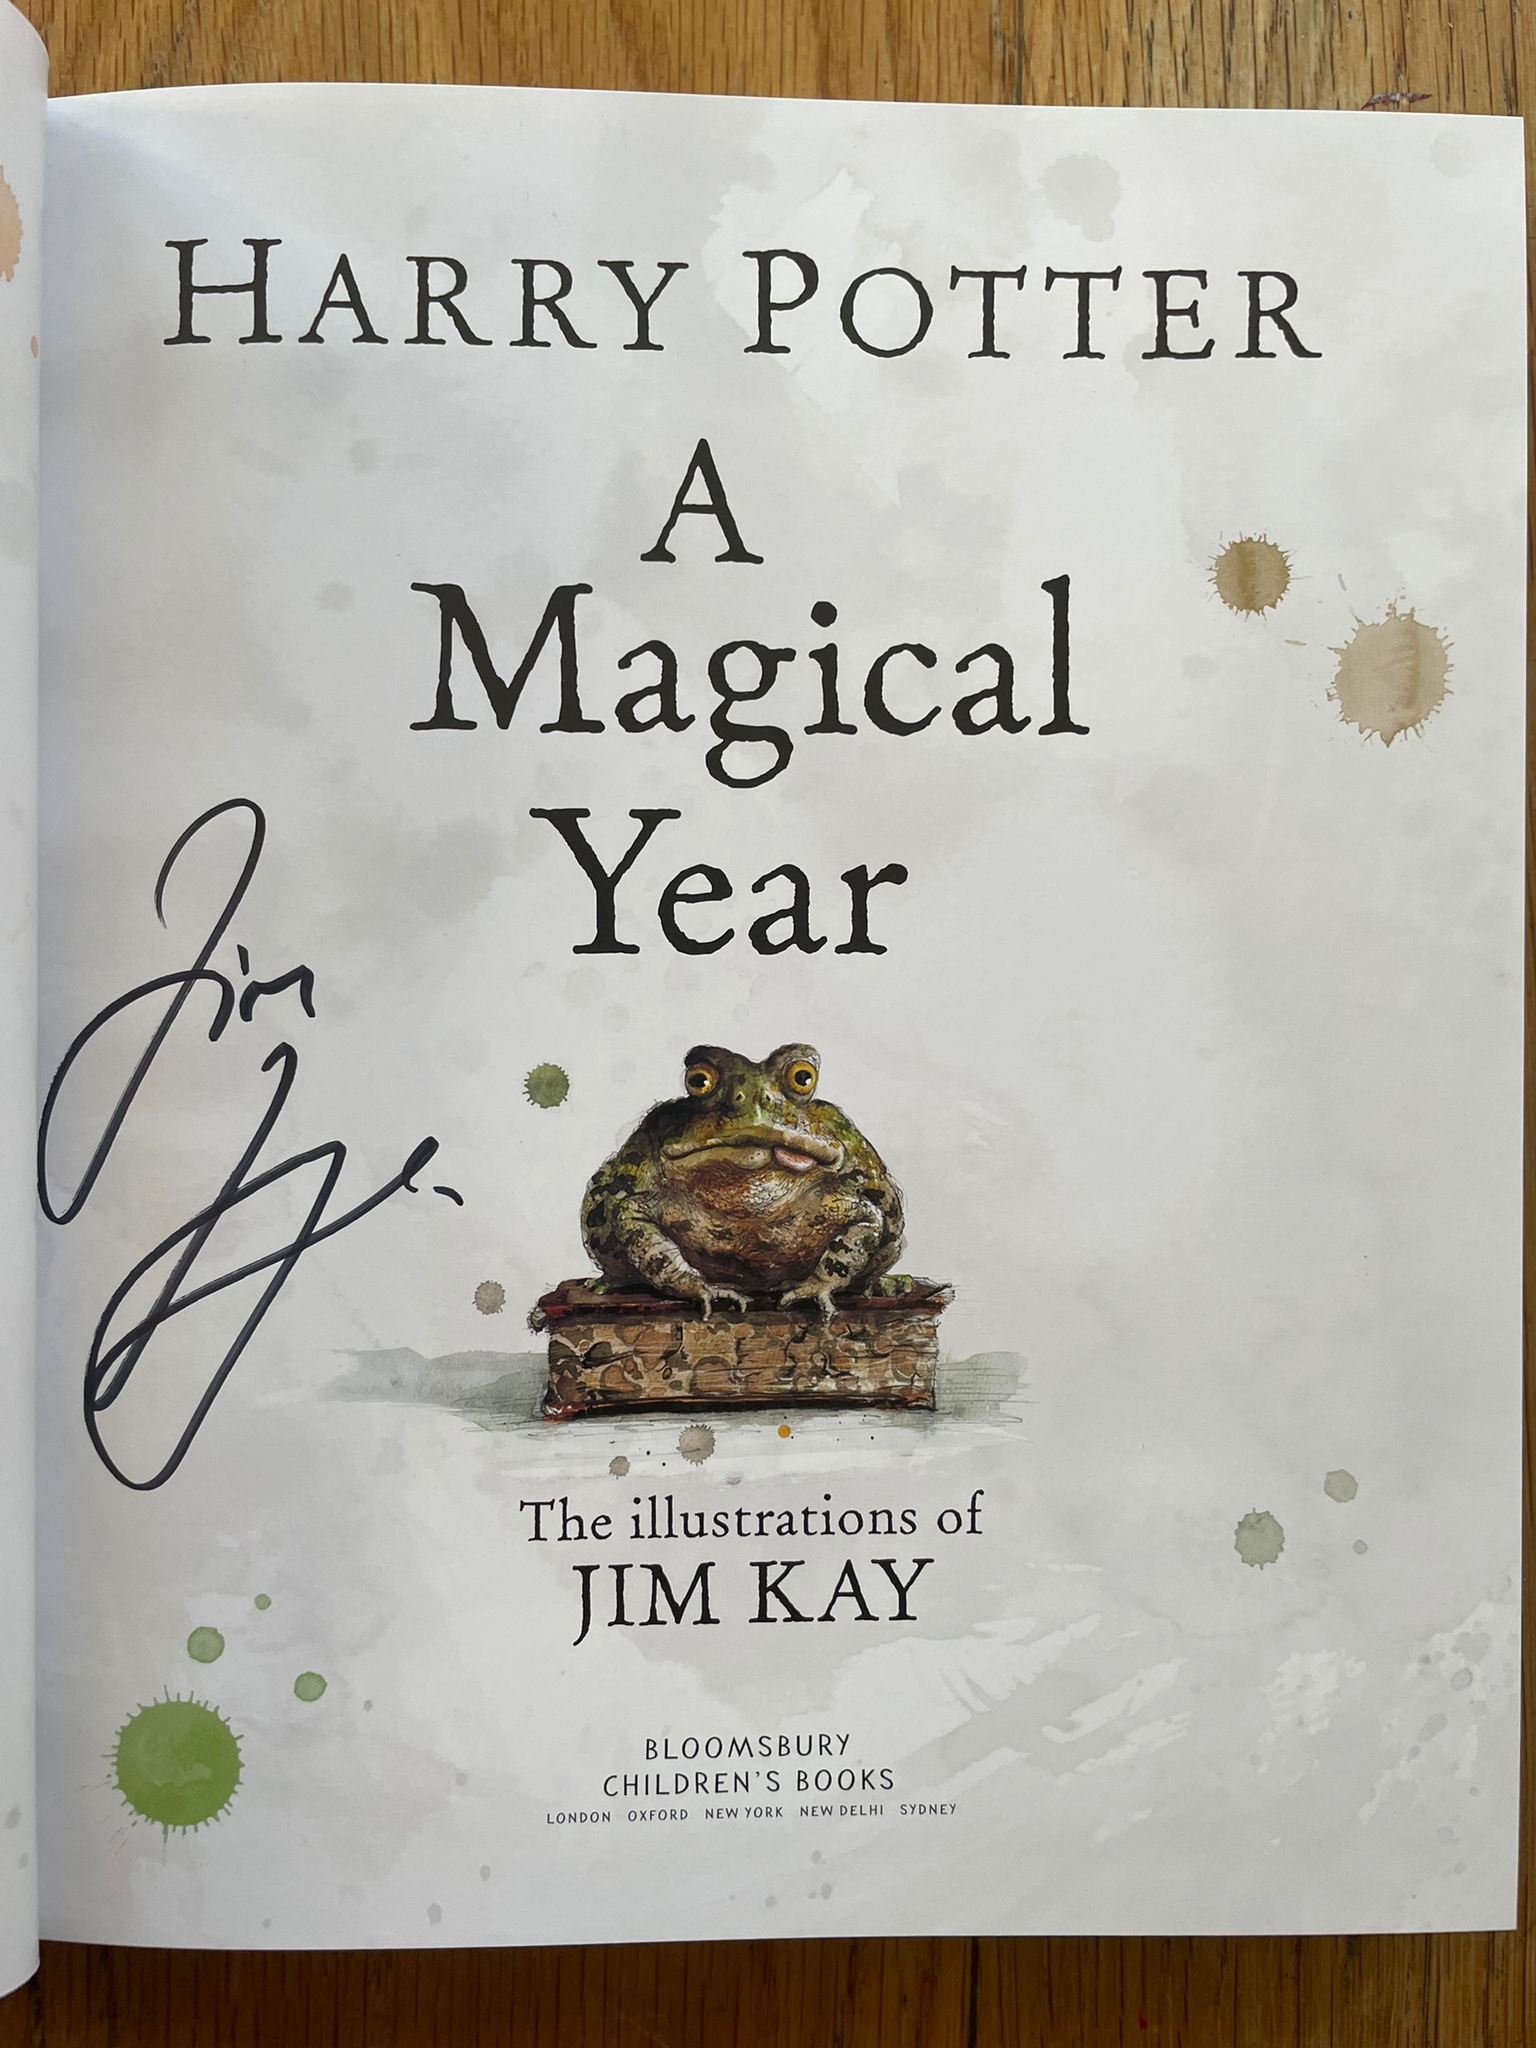 Signed　Rowling,　Potter:　The　Year:　Harry　Kay:　Rowling)　1st　Jim　A　by　Kay　Magical　New　Illustrations　Illustrator(s)　(2021)　Hardcover　of　by　Jim　Edition,　Setanta　Books